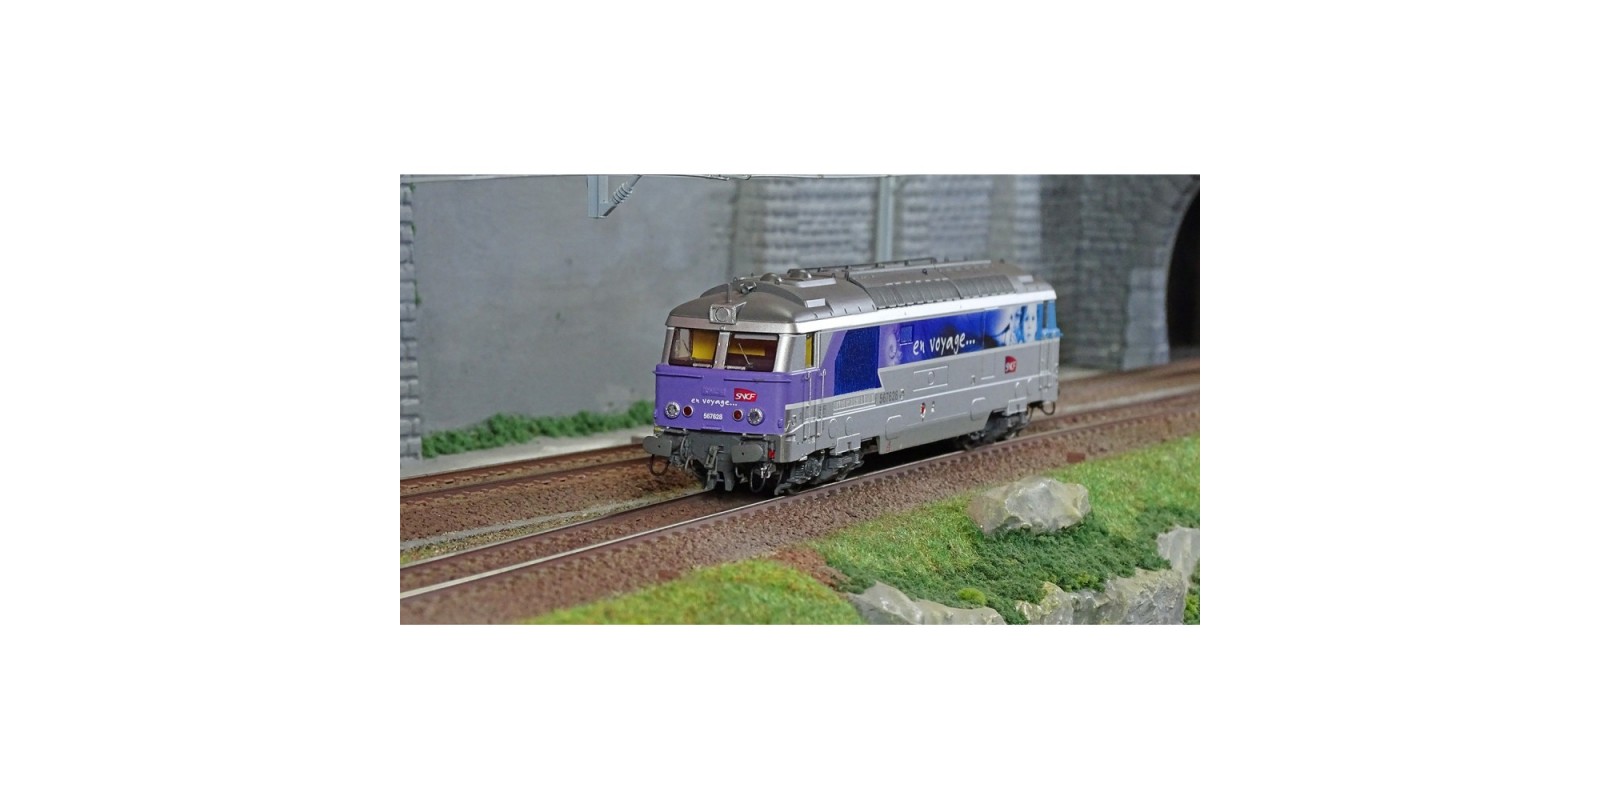 REMB169S Diesel locomotive BB67628 Traveling "Nevers" DCC SON - REE MODELES MB169S - SNCF - HO